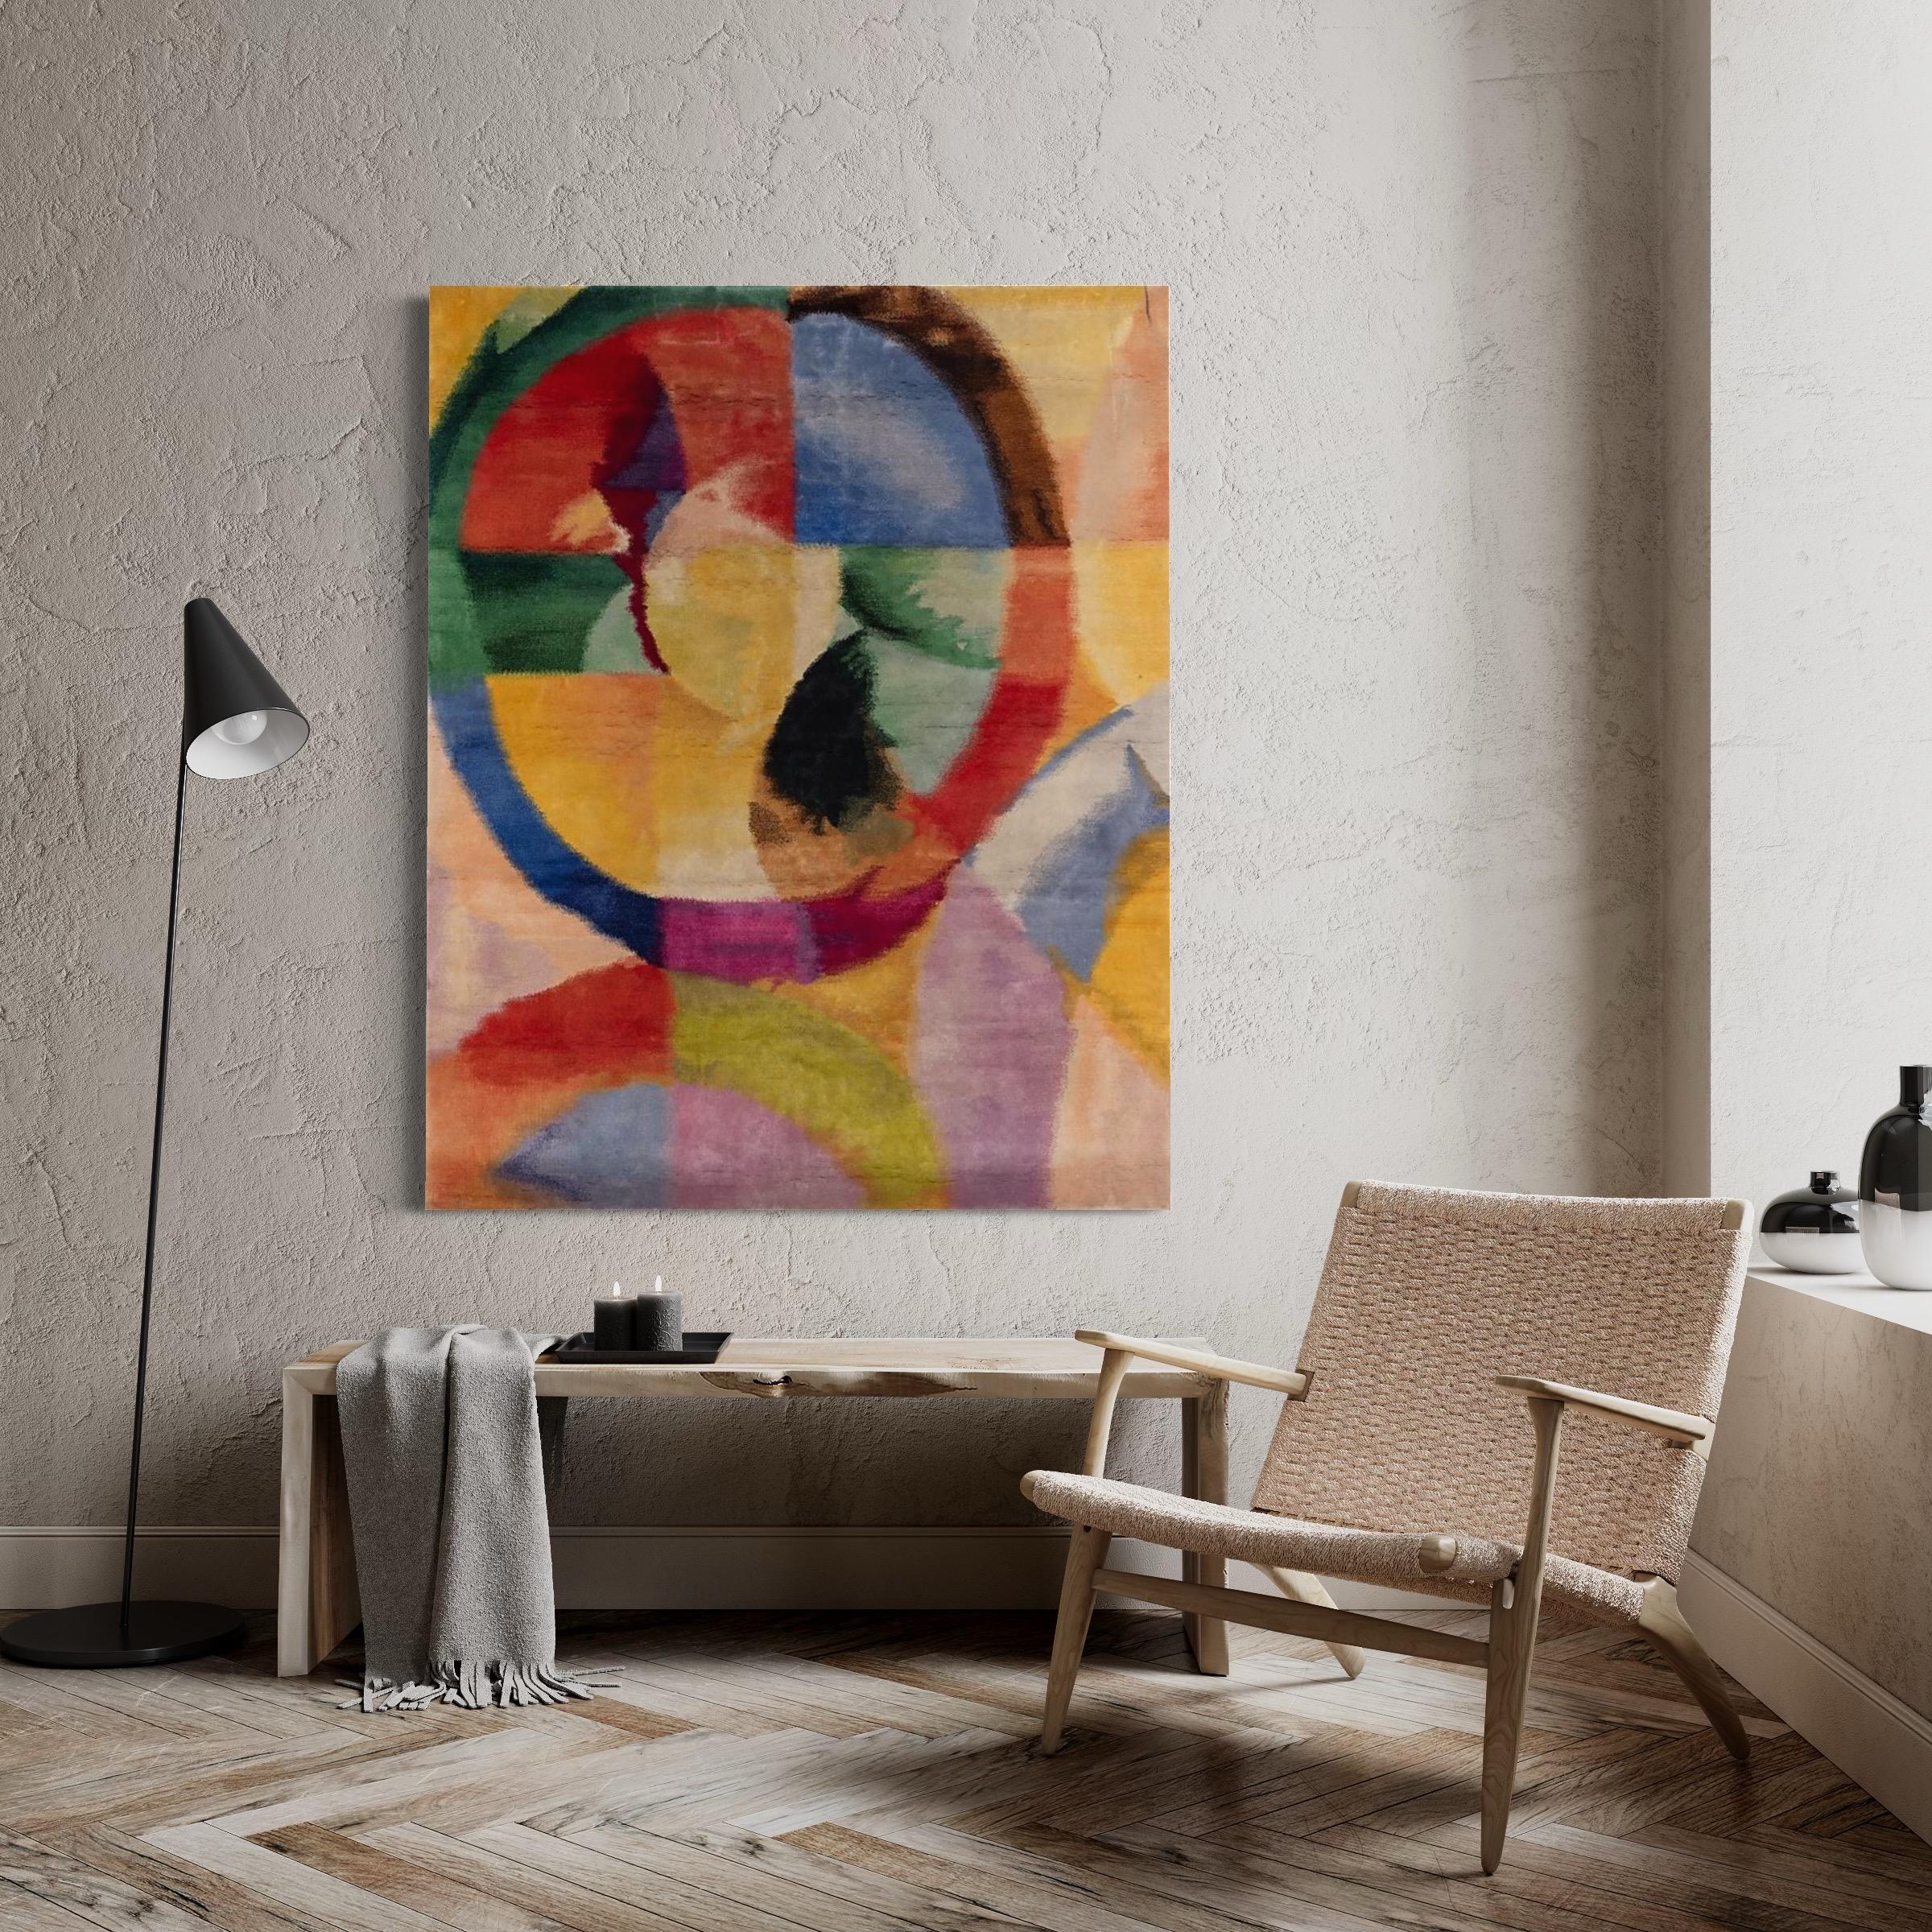 Soleil n.1. by Robert Delaunay, 1980 ca, Silk wool Tapestry woven on Canvas 1